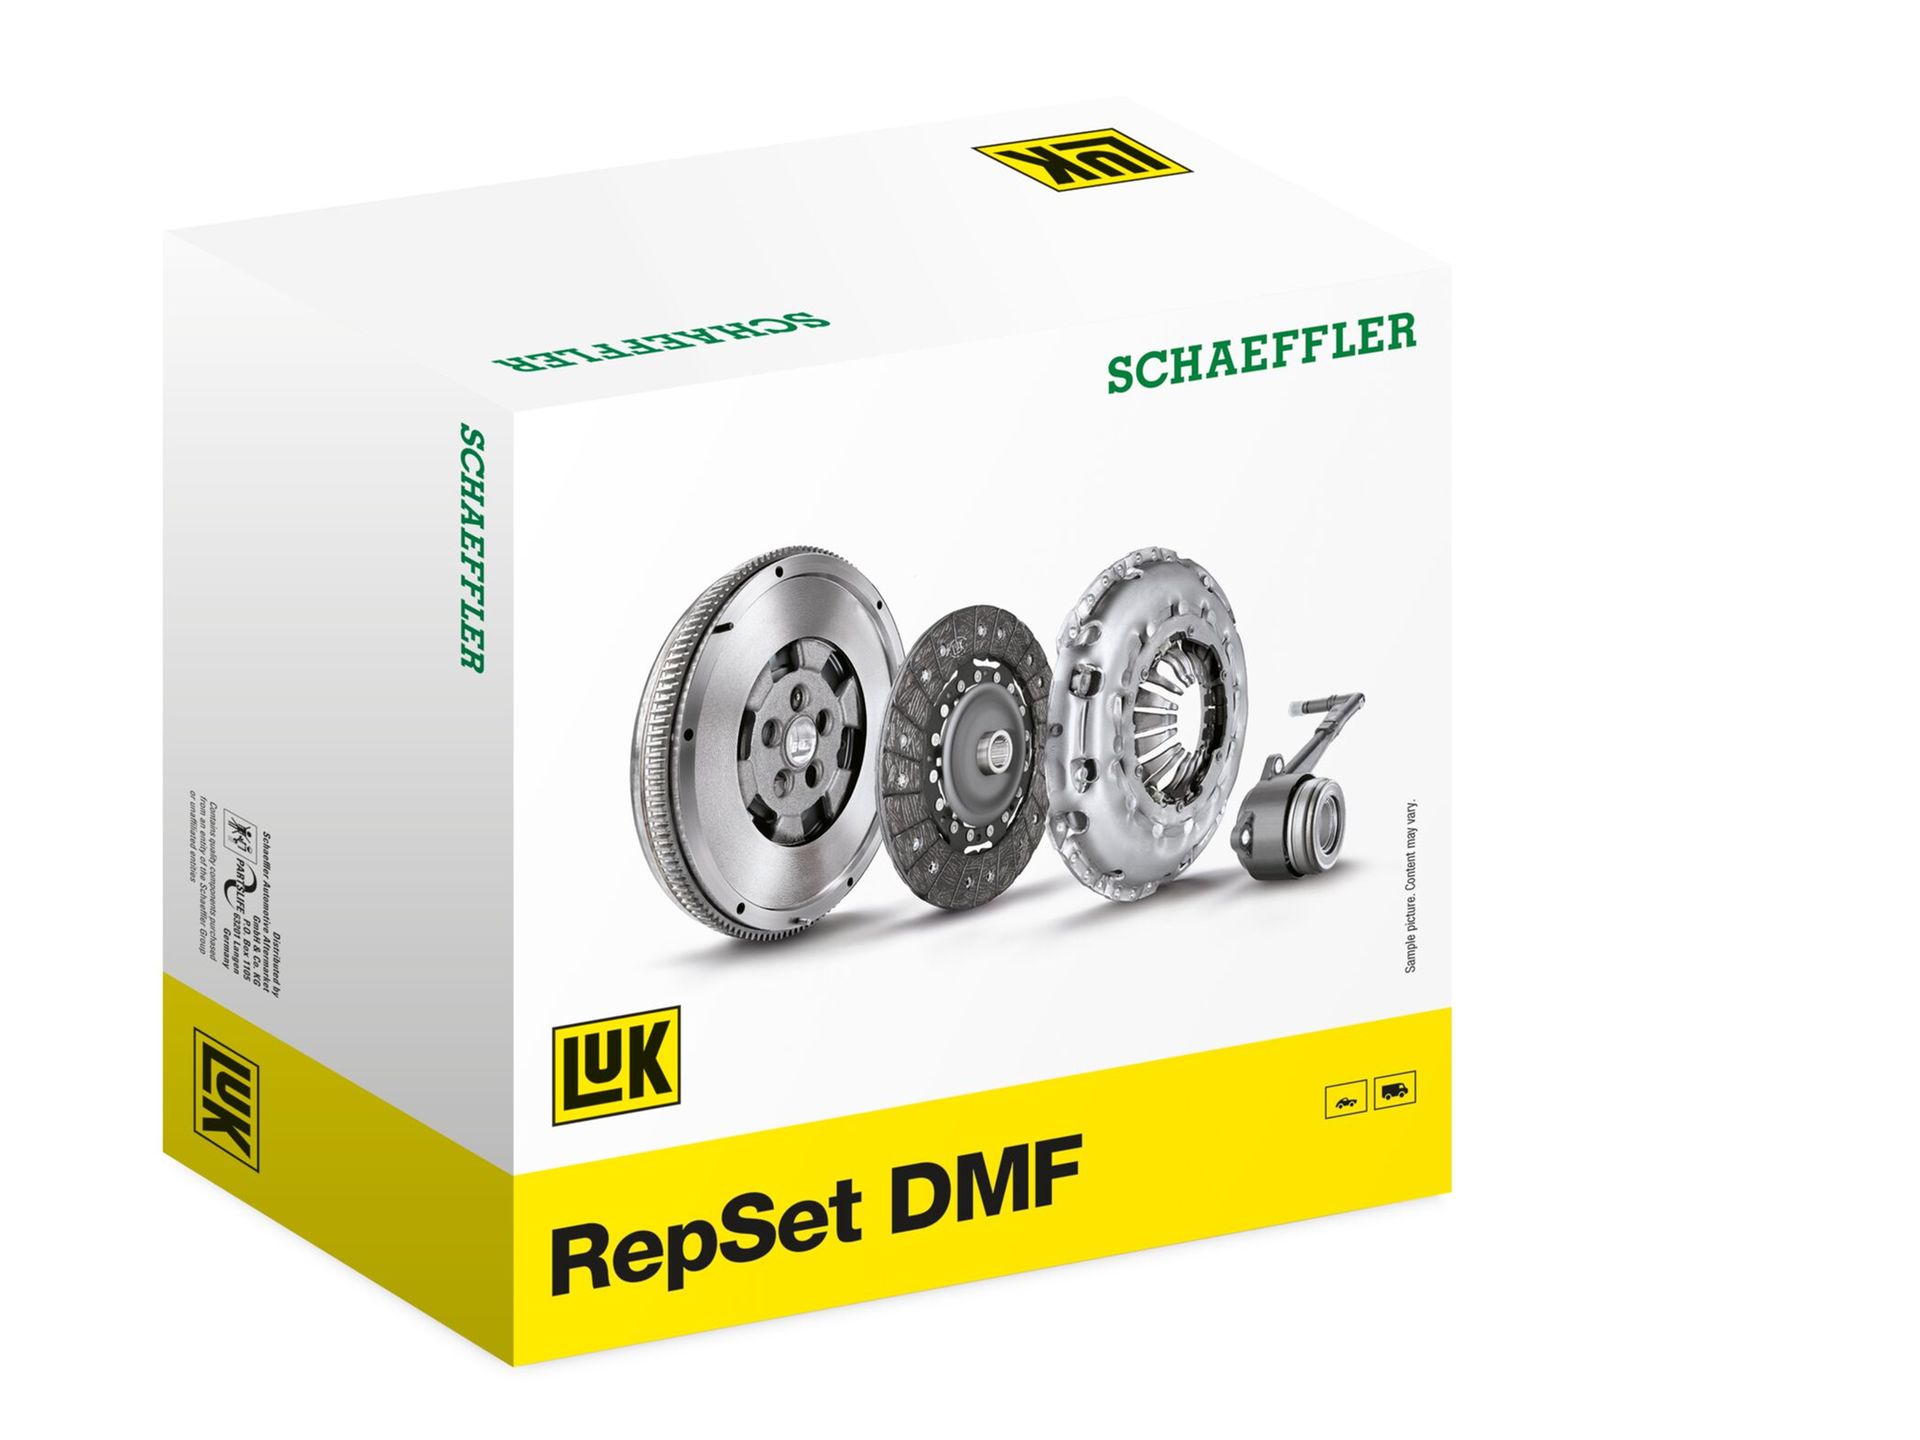 LuK RepSet - The repair solution for the manual clutch